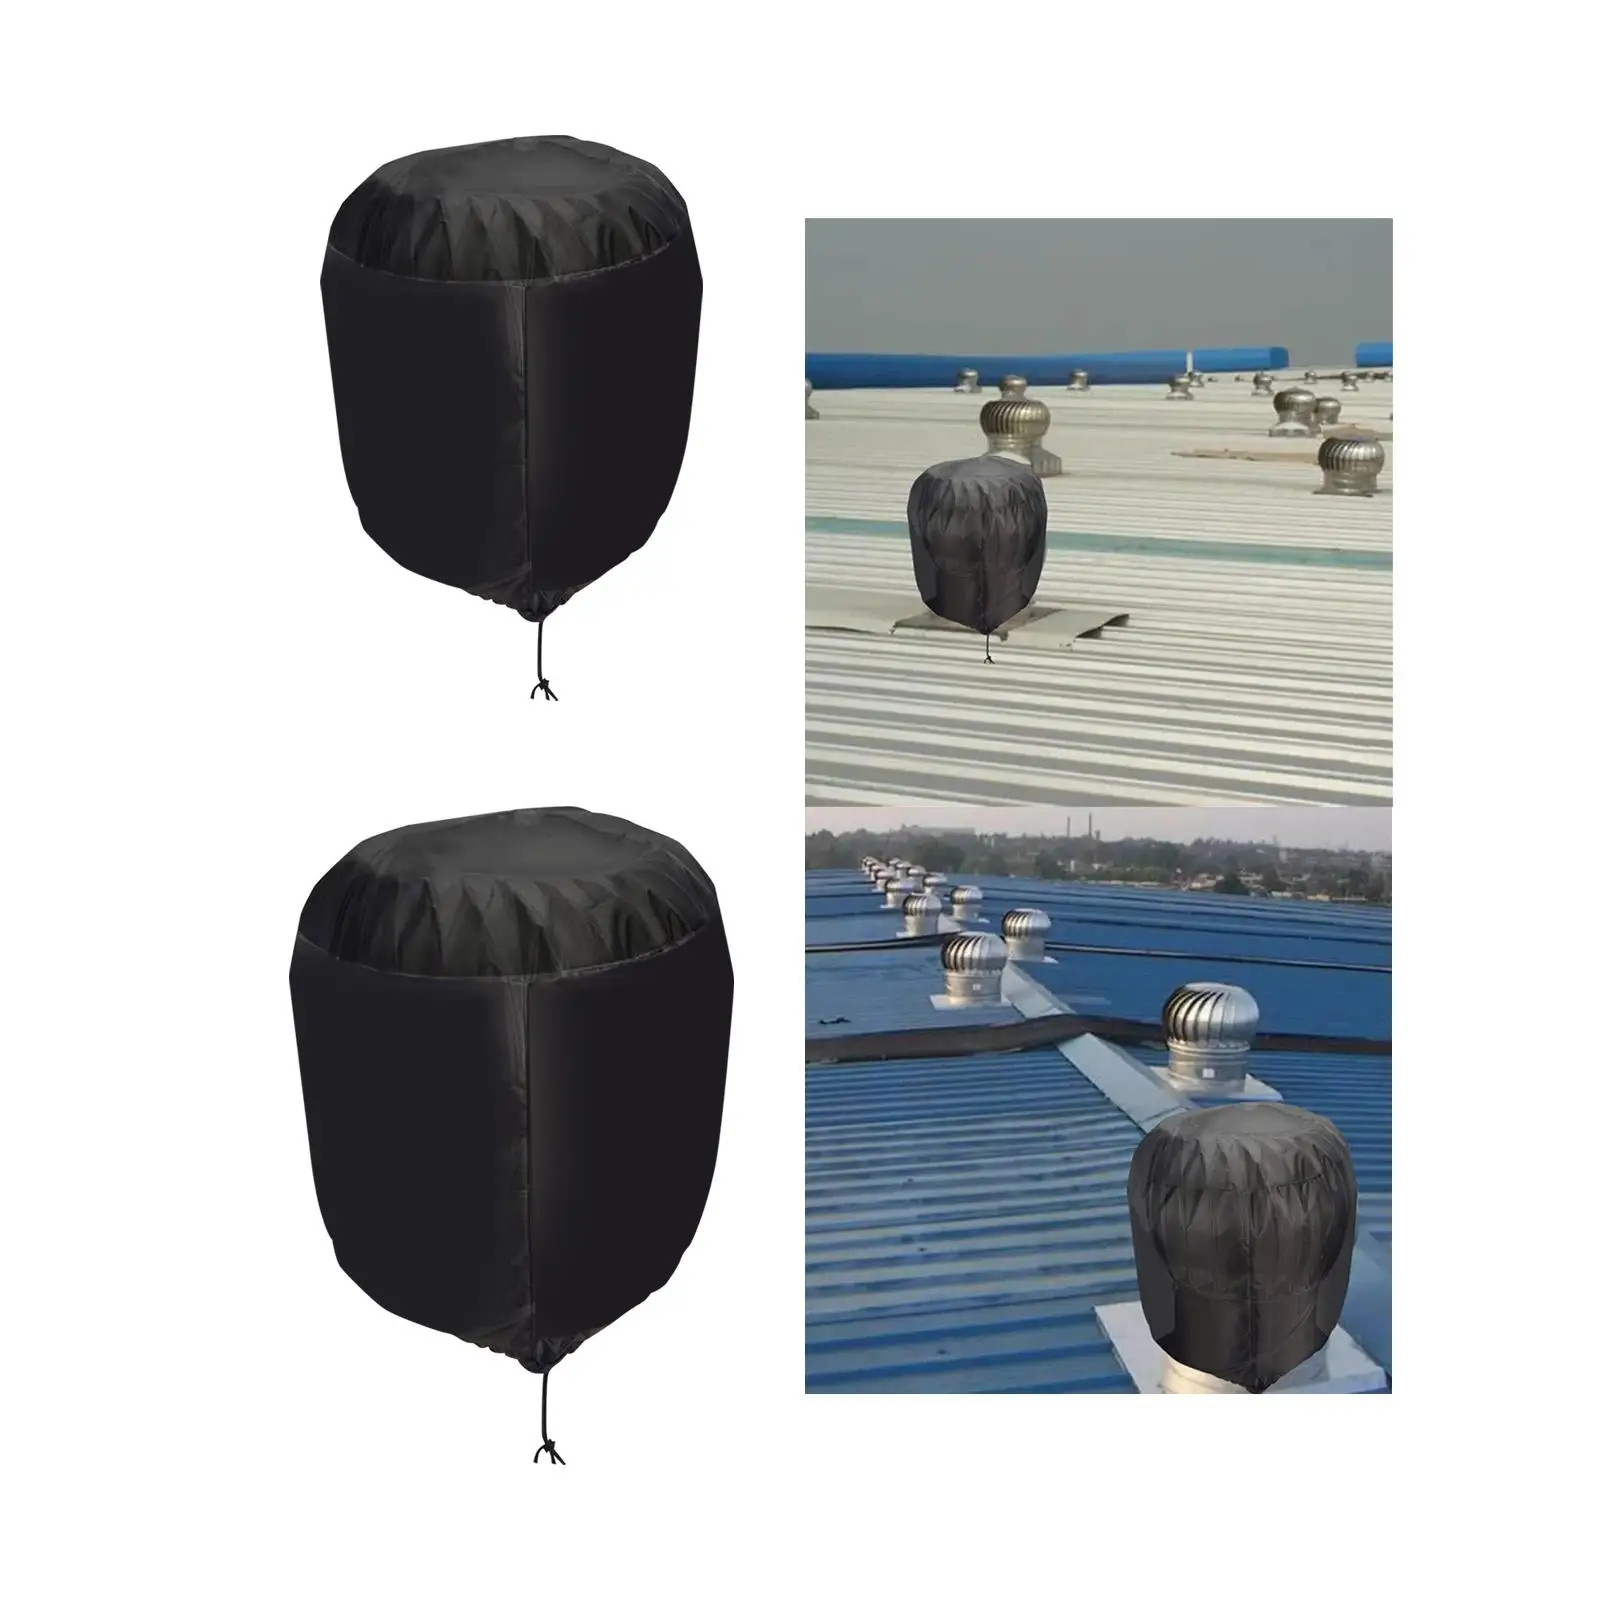 vent cover Roof 420D Oxford Oxford Fabric Heavy Duty Waterproof Water Resistant Drawstring Protector